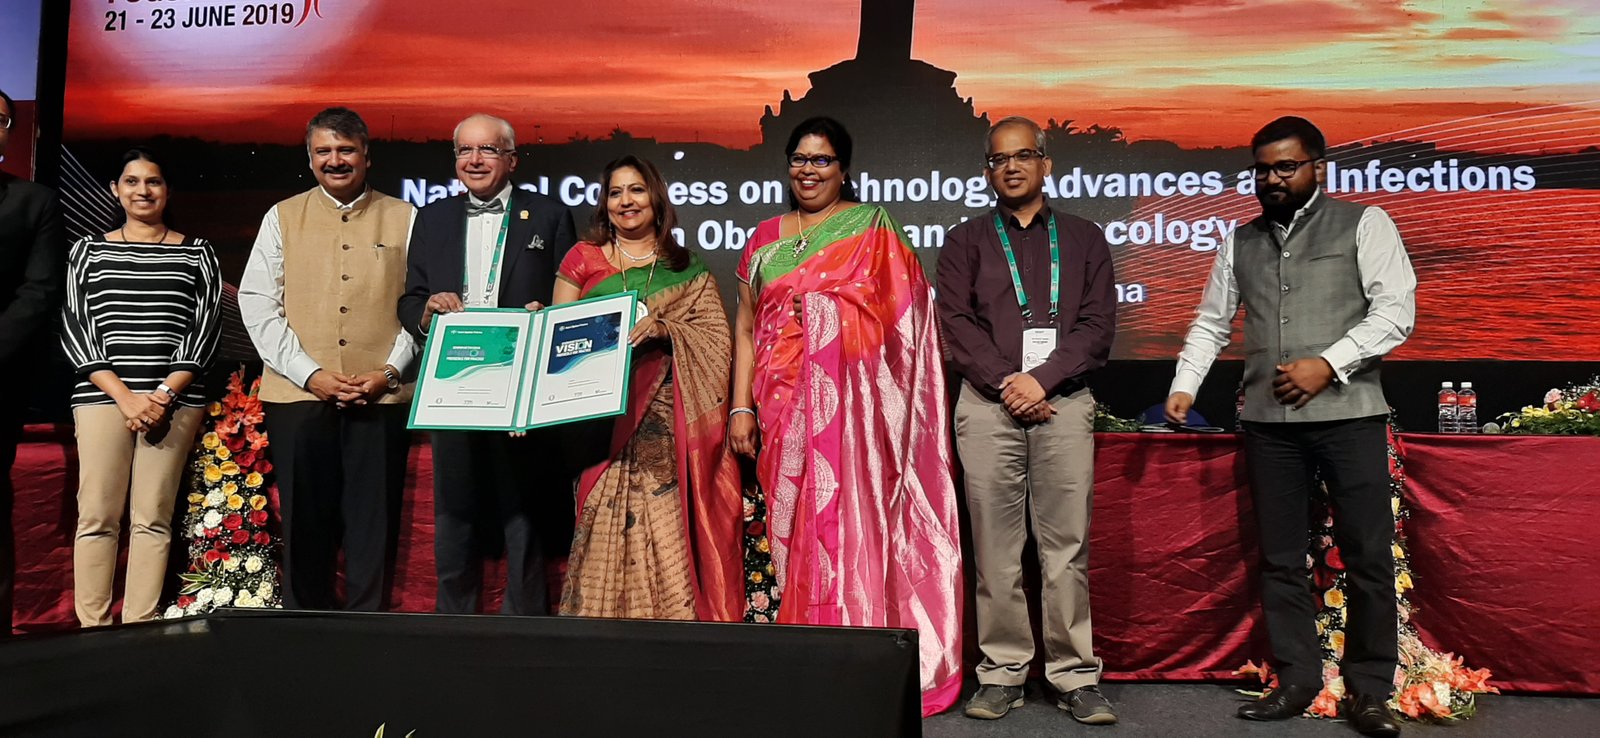 Dr. Nandita Palshetkar, President - FOGSI  along with the key FOGSI office bearers and gynecologists launched VISION in collaboration with Bayer Zydus Pharma at TAIOG 2019